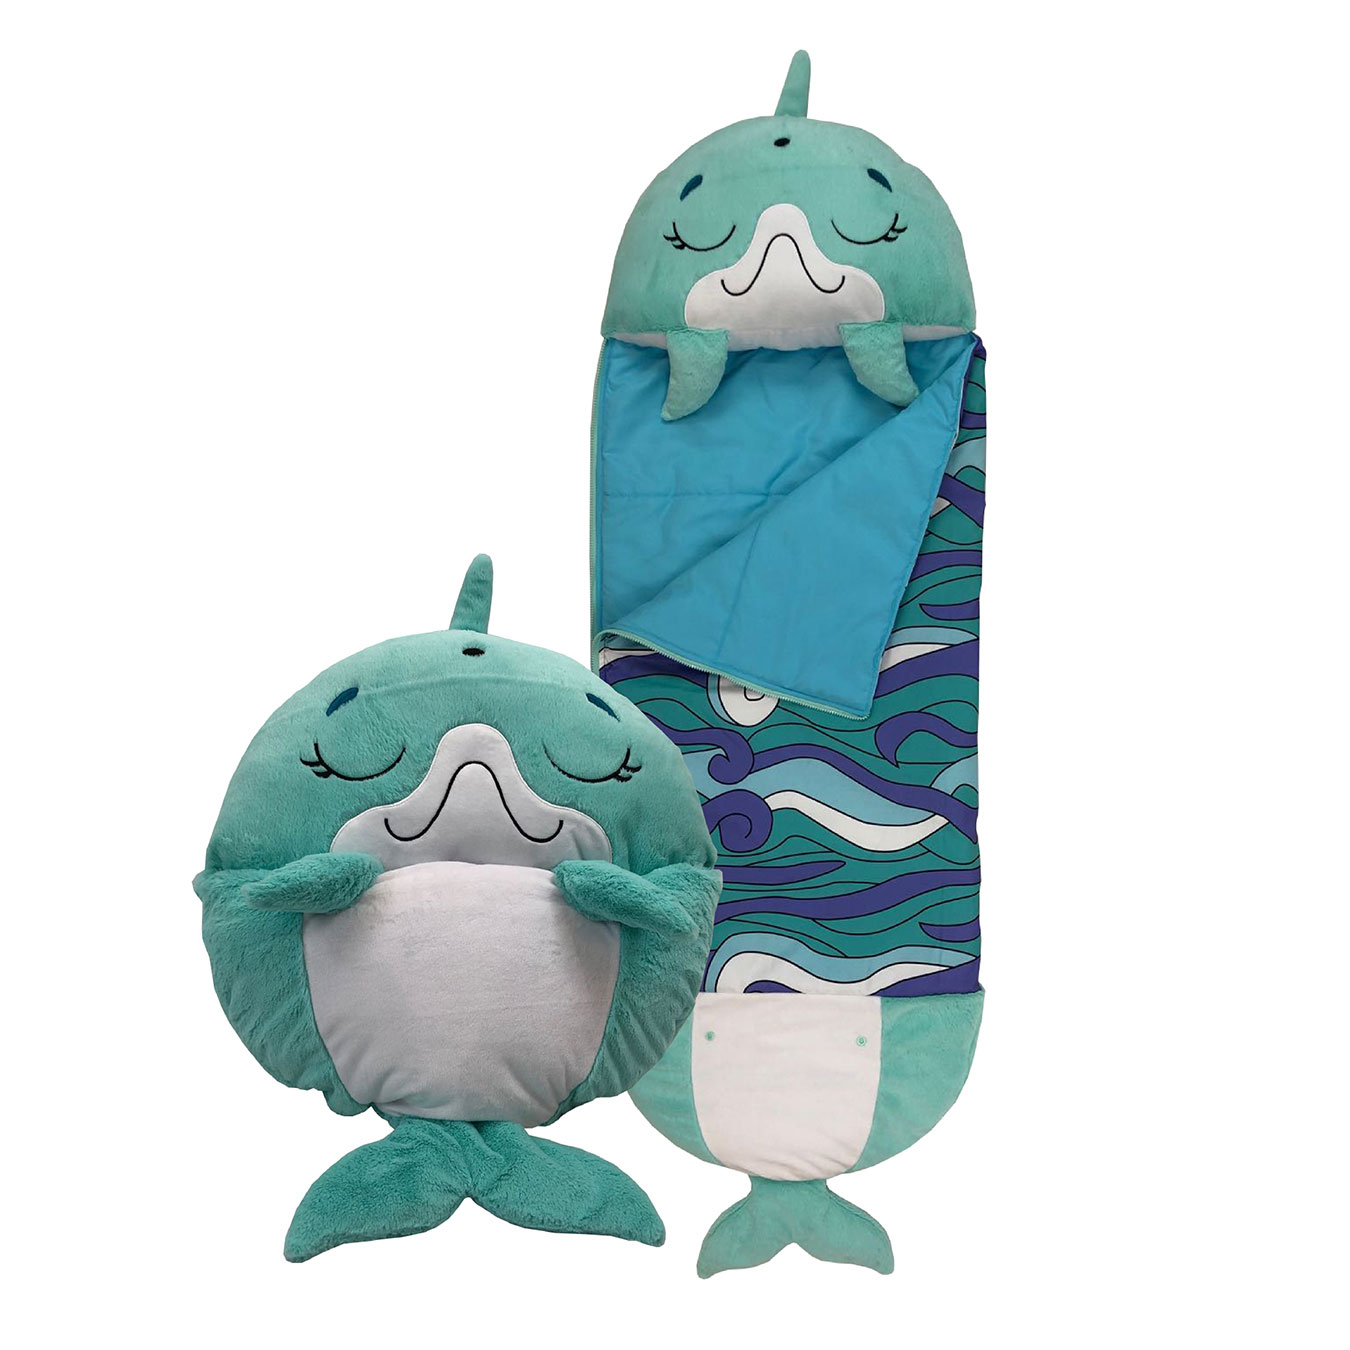 View Happy Nappers Dolphin Disco Medium Ages 3 to 6 Plush Toy That Opens To A Fun Sleeping Bag High Street TV information